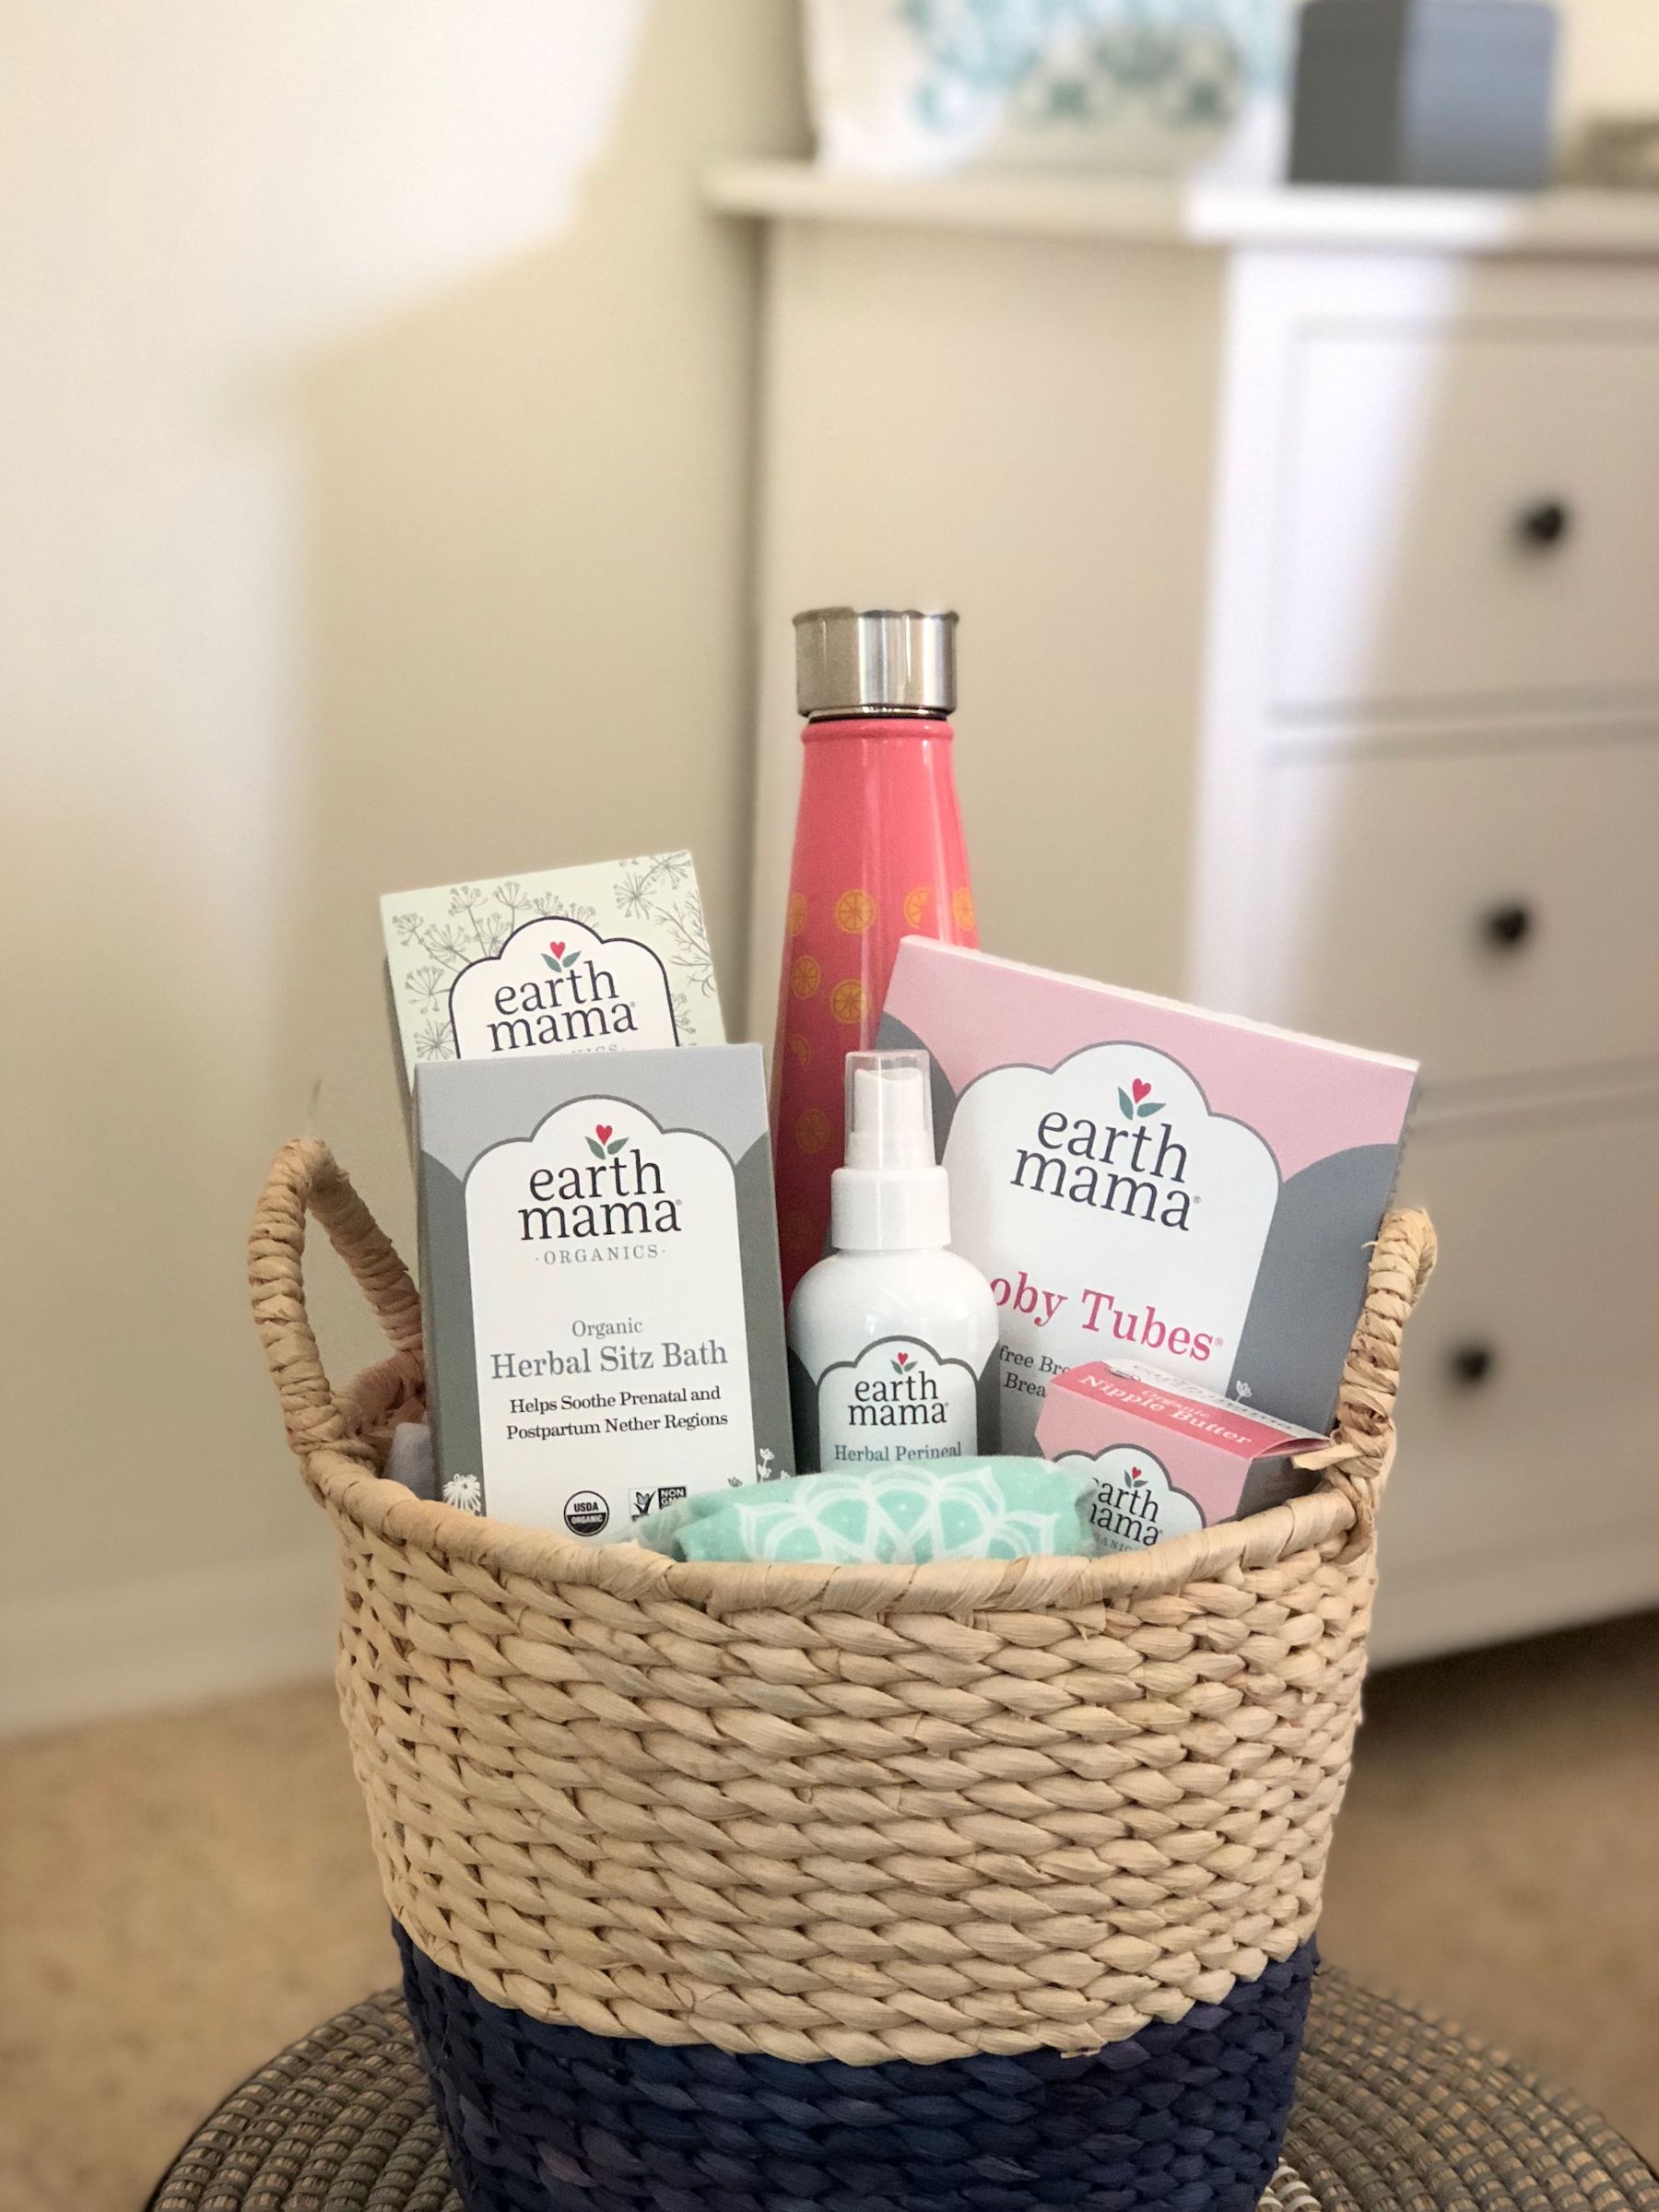 New Mom Gift Baskets 2022 - Ready-to-Send or DIY Postpartum Gifts